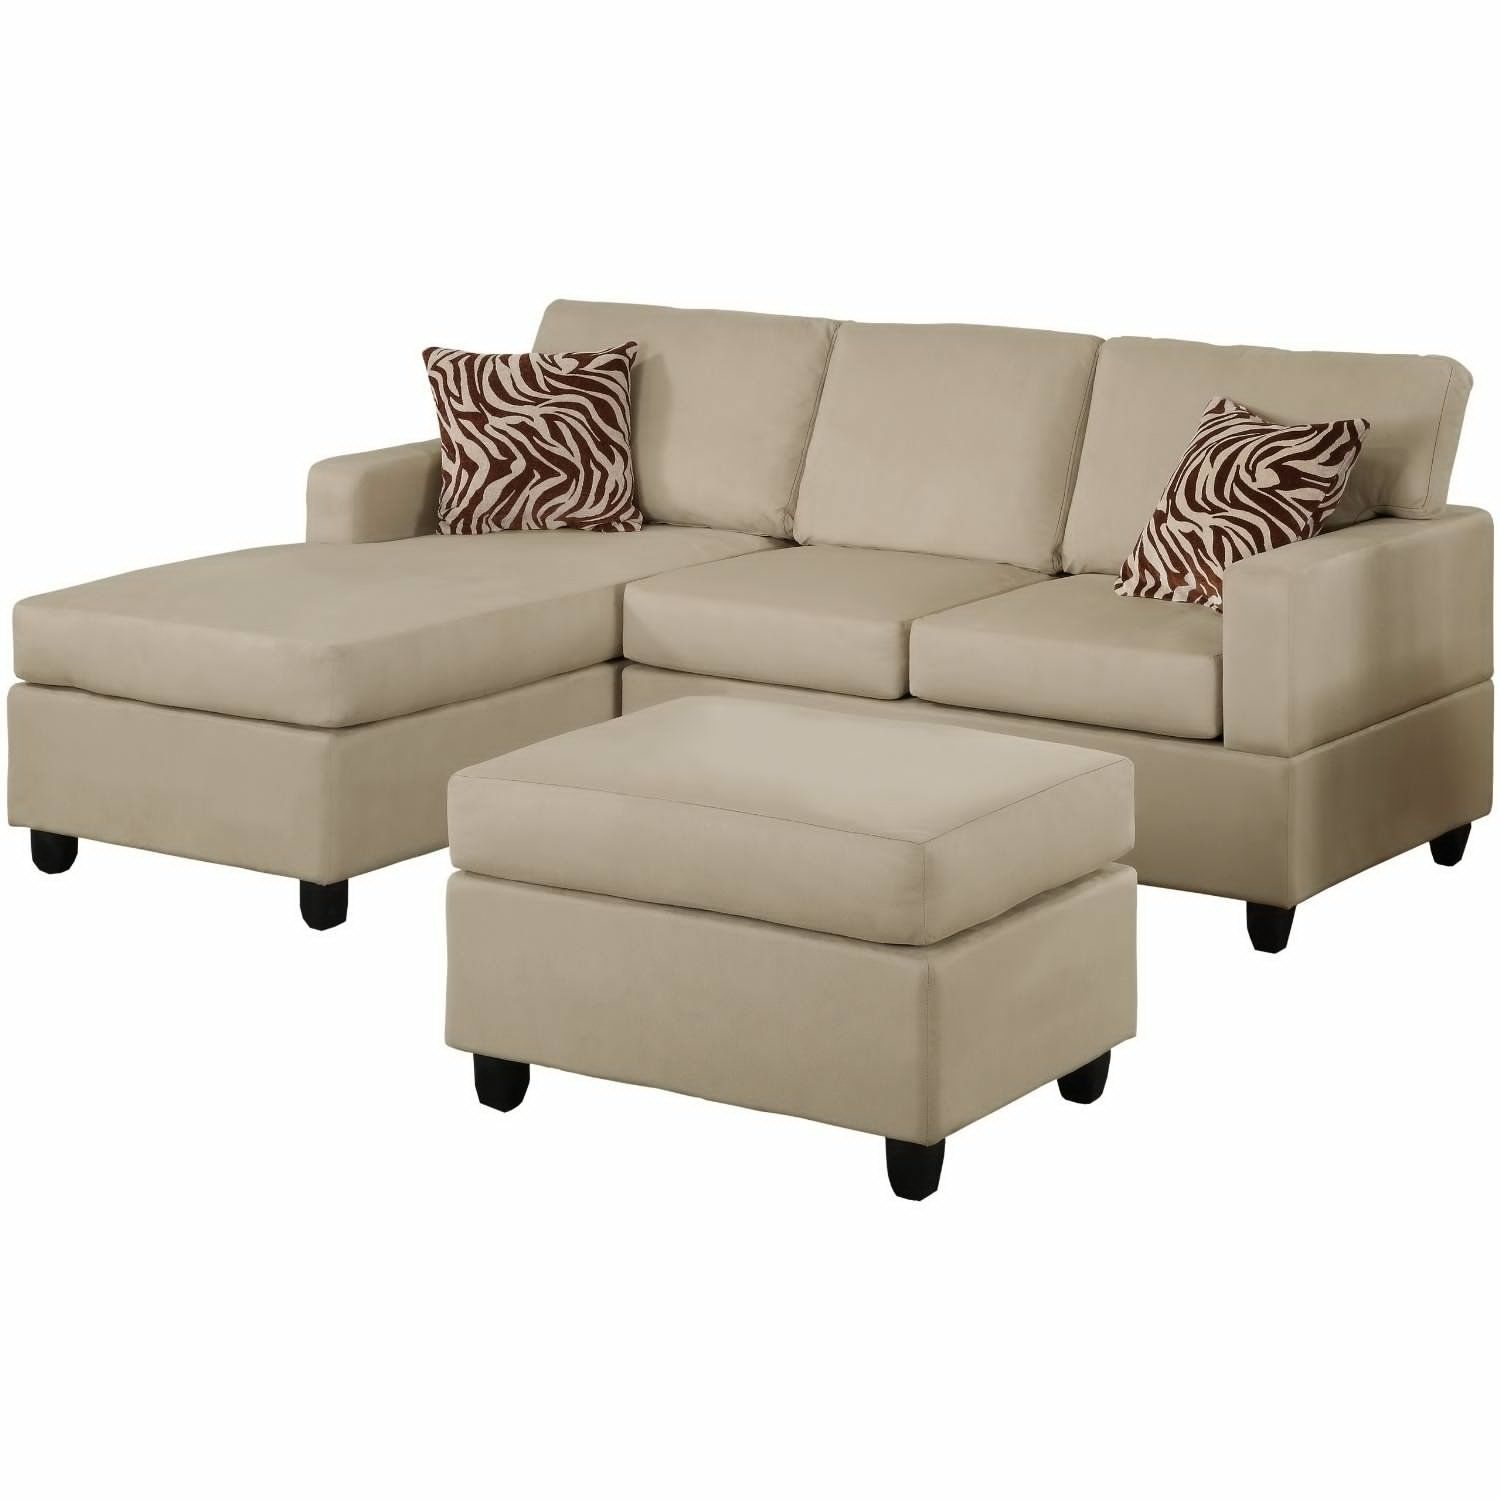 Sectional Sofa Design: Thomasville Sectional Sofas Recliners Price Within Thomasville Sectional Sofas (View 2 of 10)